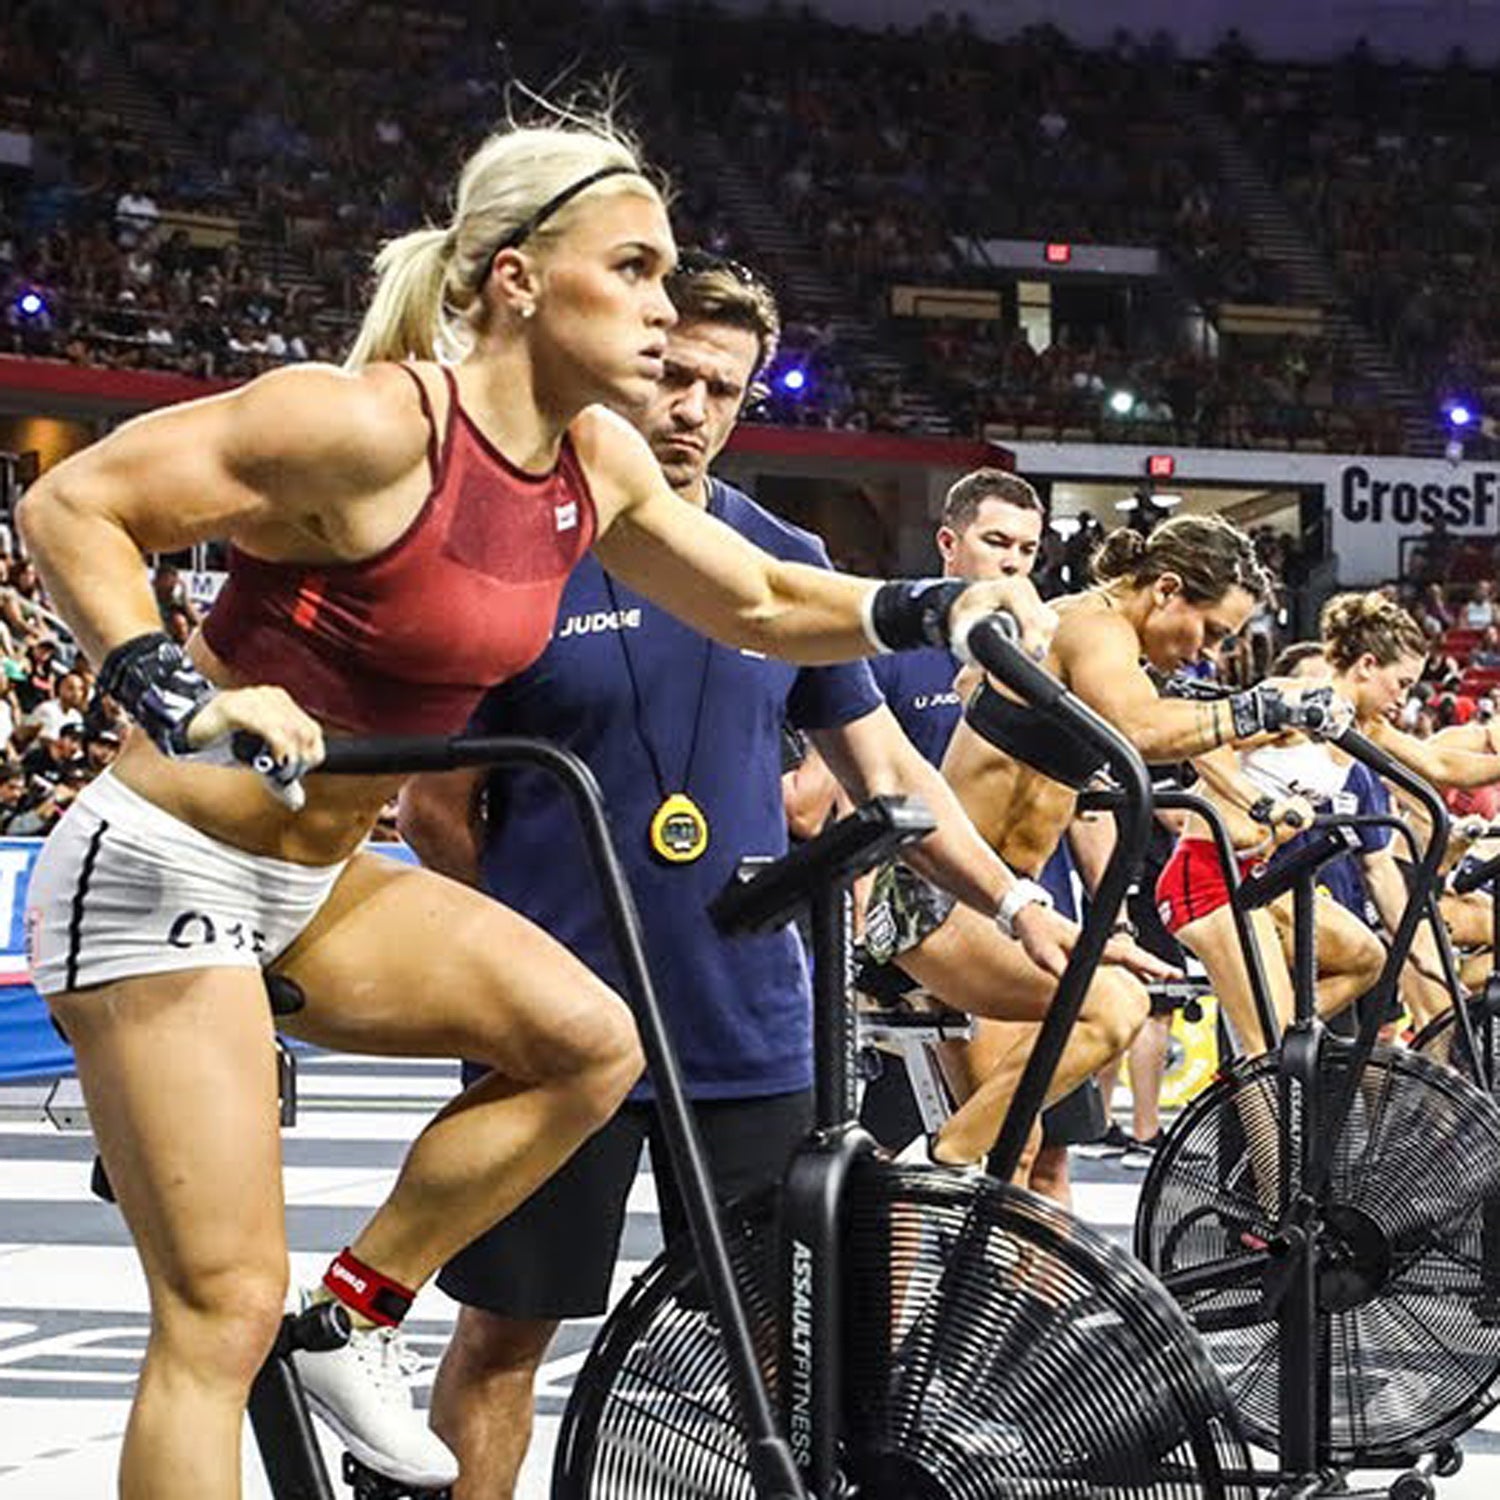 CrossFit Announces Games Are Changing To Online Format